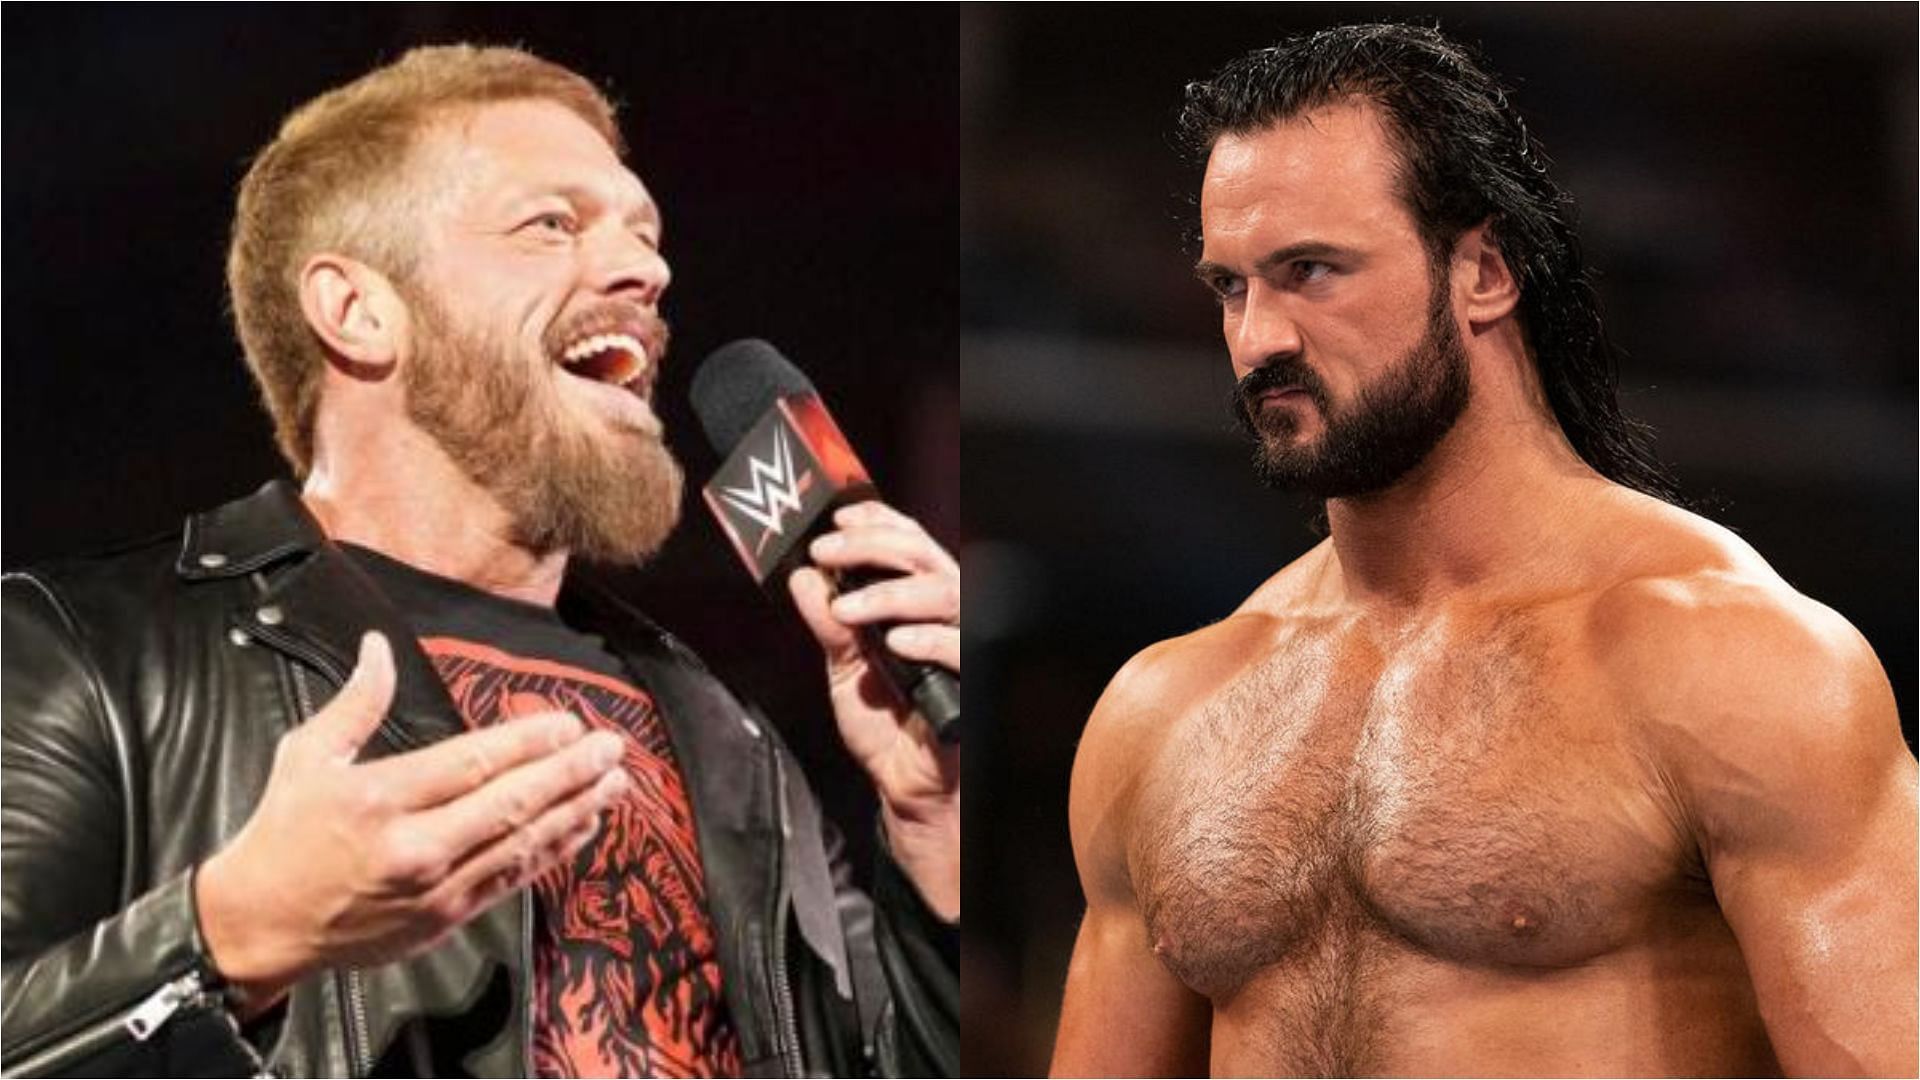 Edge and Drew McIntyre are far from confirming their WWE futures.